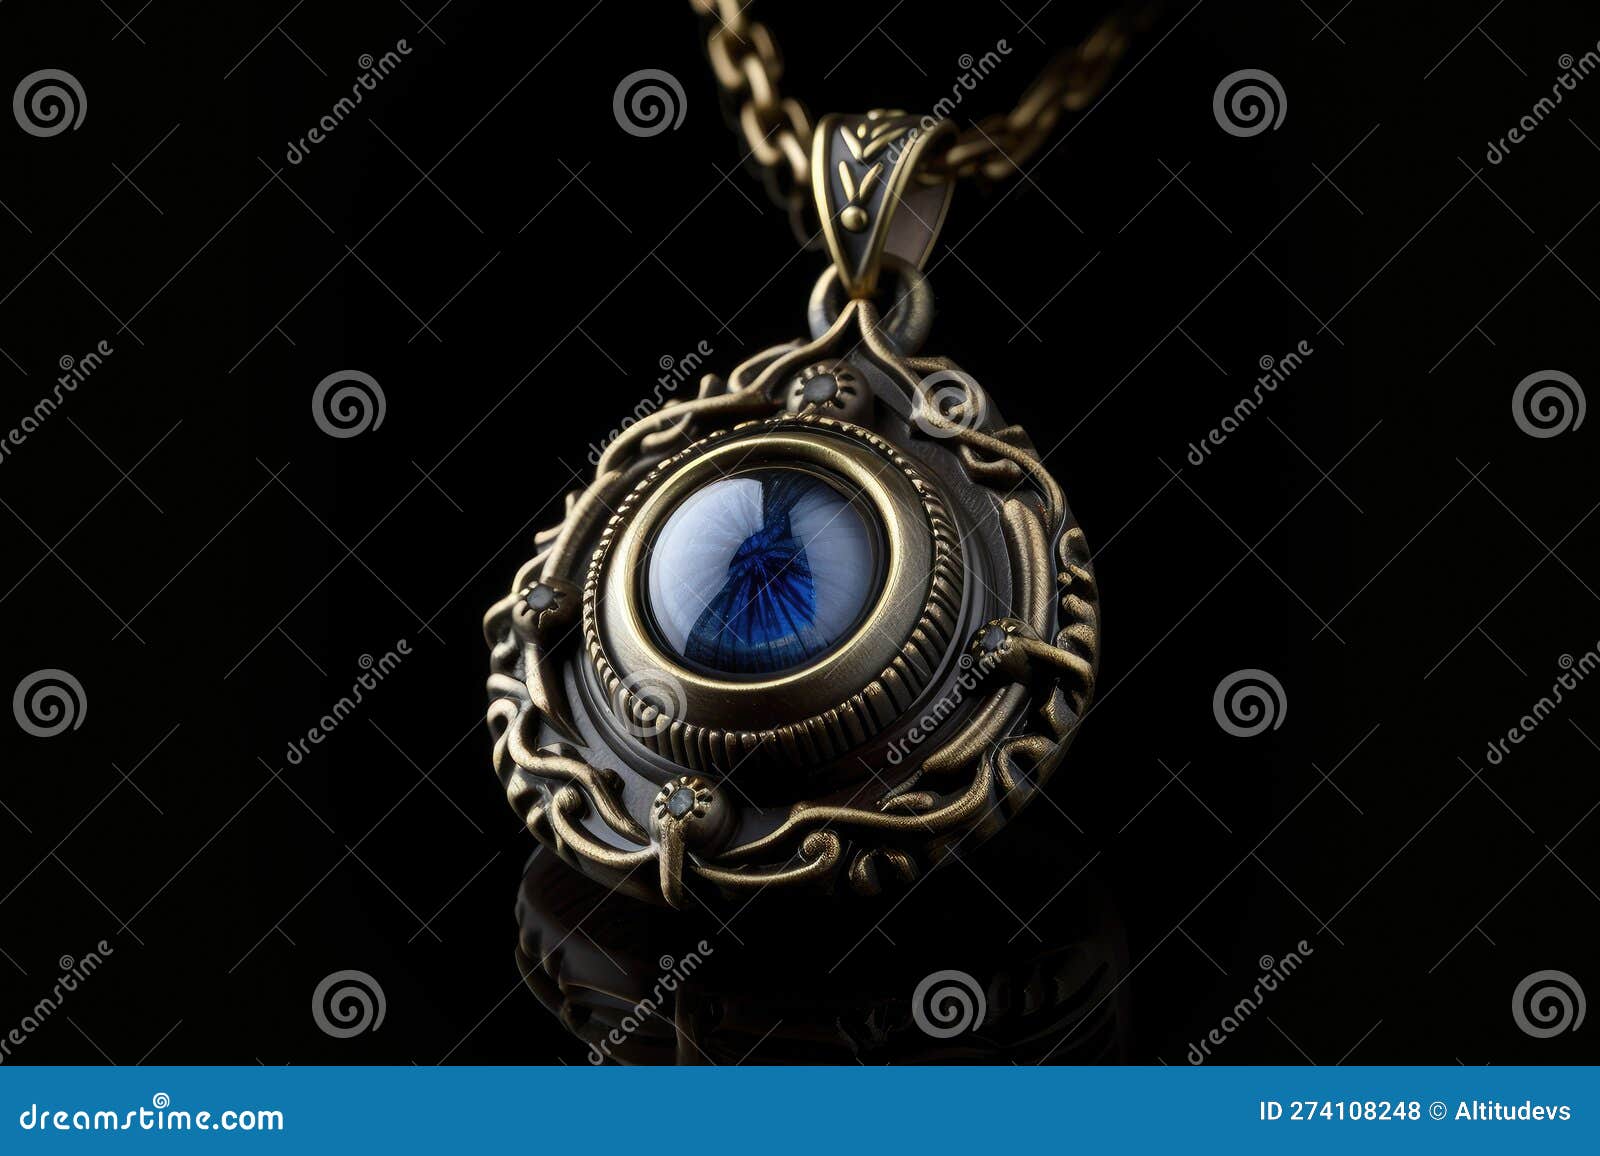 evil eye amulet, with its stylized eyeball and fearsome countenance, brings protection to its wearer